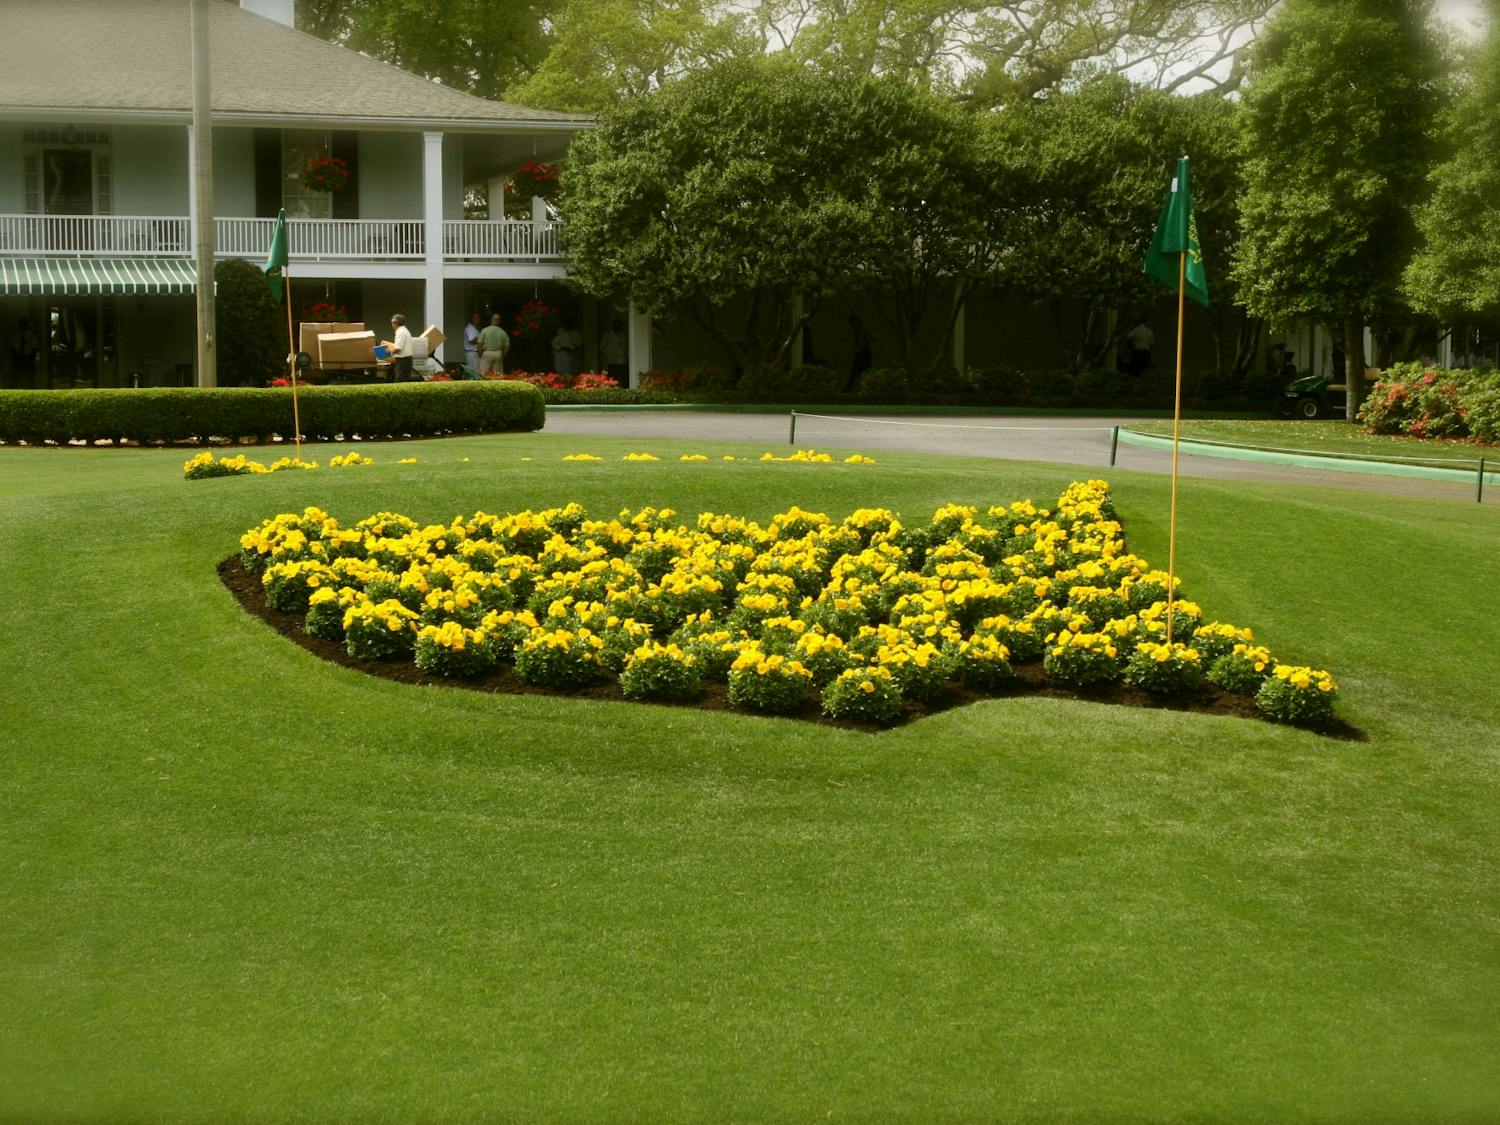 The logo for the Masters Tournament made of flowers, in front of the clubhouse of the Augusta National Golf Club.